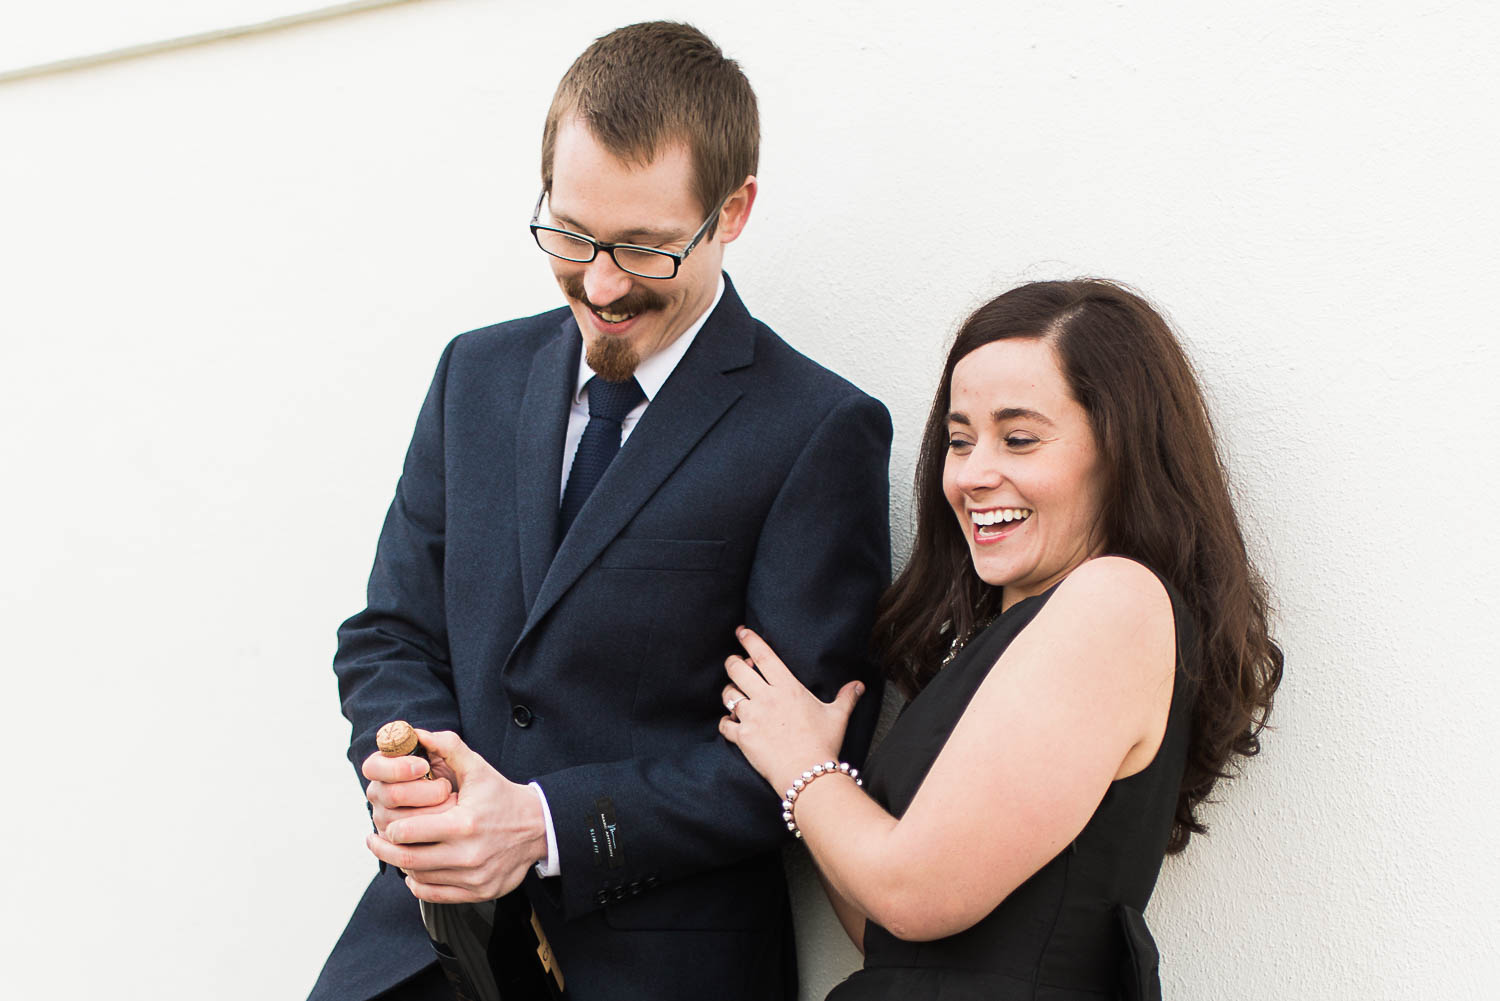 Indianapolis Museum of Art Engagement Session, Ashley Link Photography